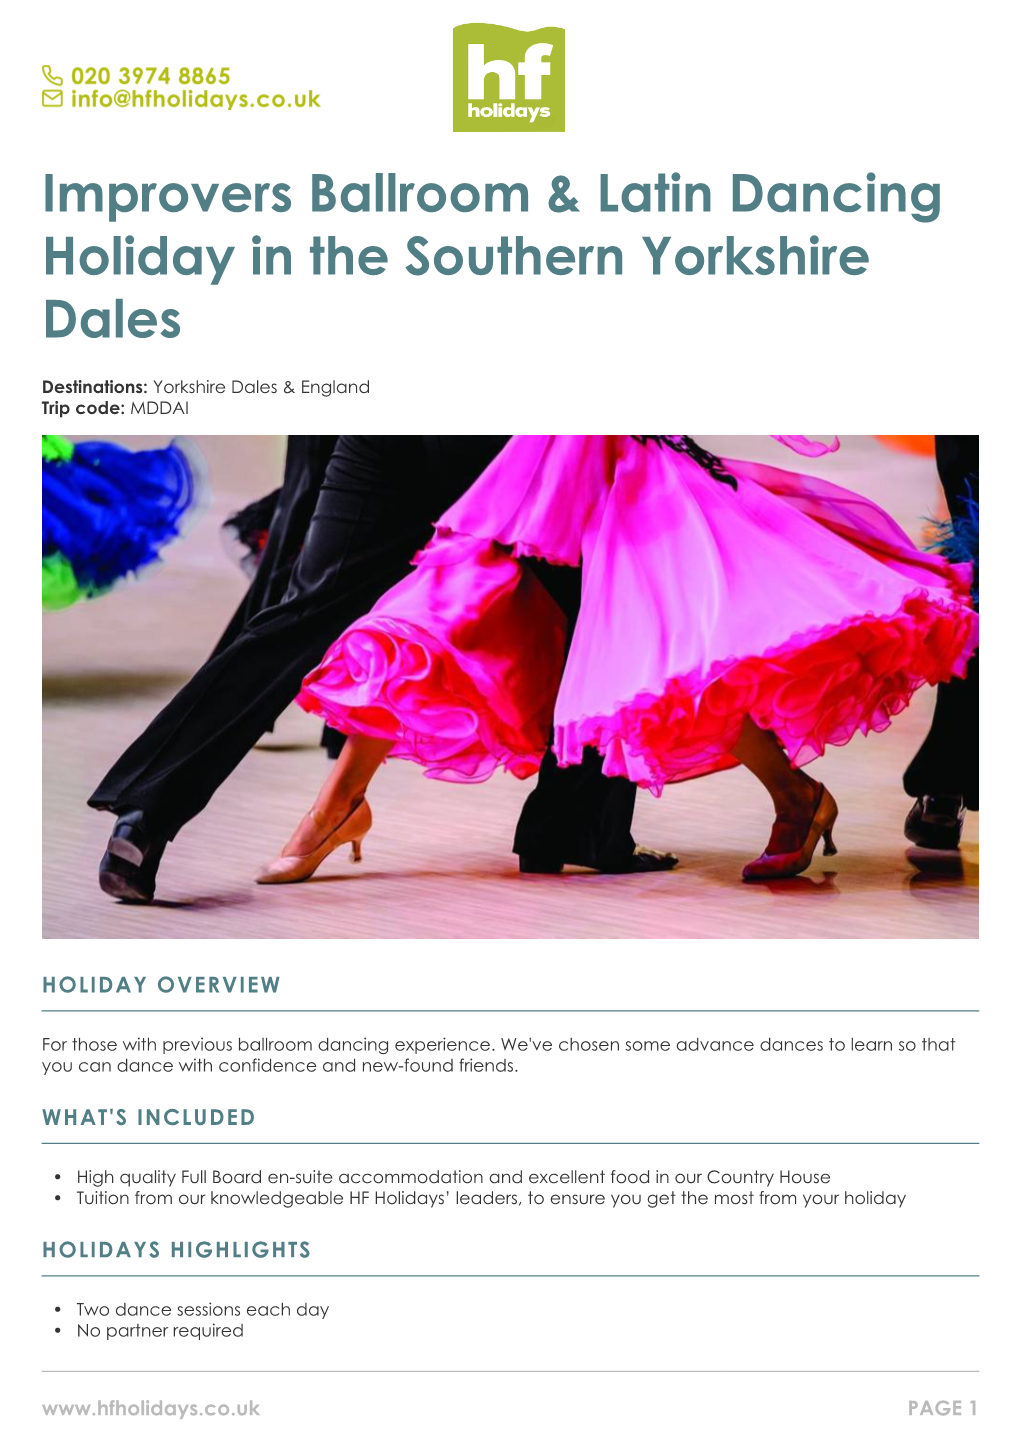 Improvers Ballroom & Latin Dancing Holiday in the Southern Yorkshire